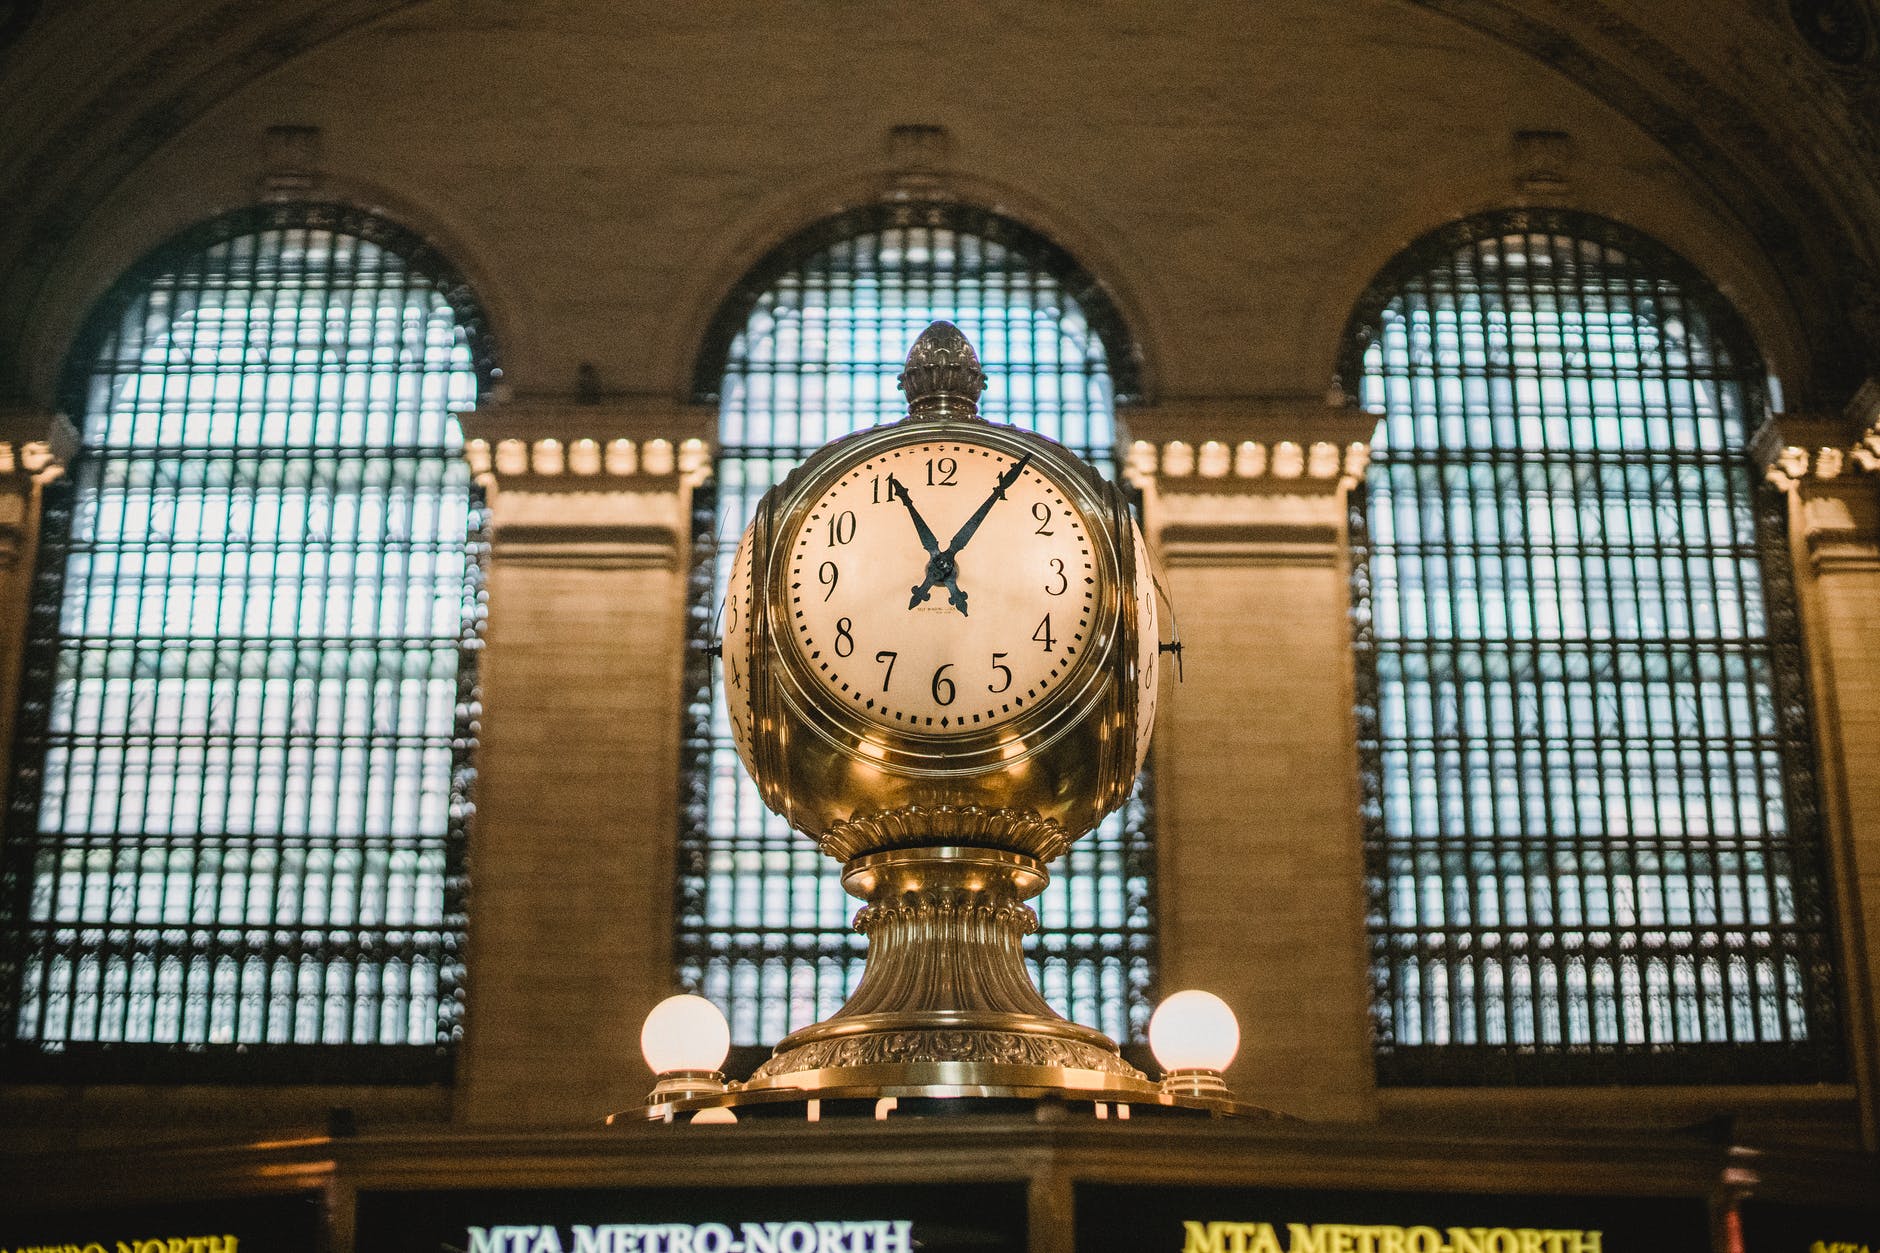 vintage golden clock in aged railway station terminal with arched windows